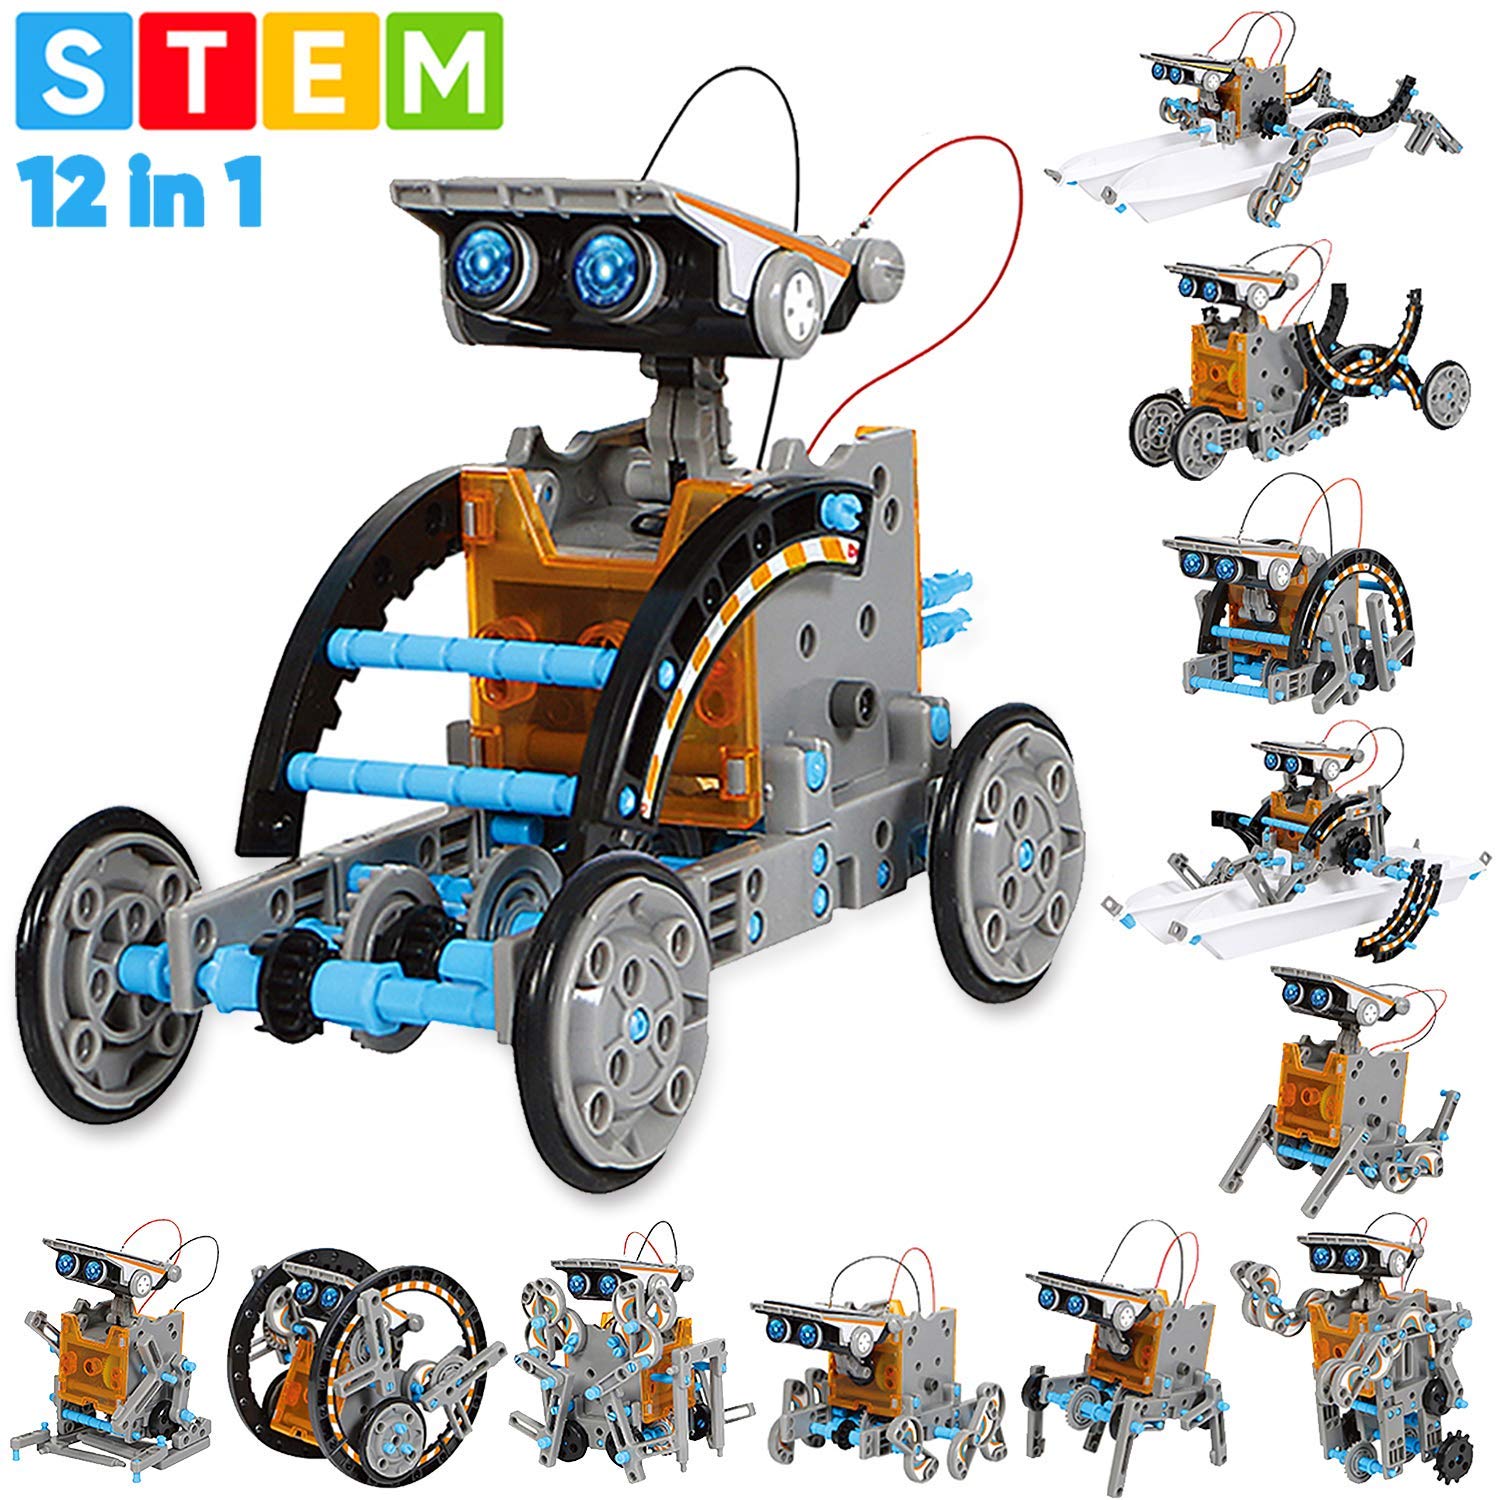 12-in-1 Education Solar Robot Toys-190 Pieces DIY Building Science Experiment Kit